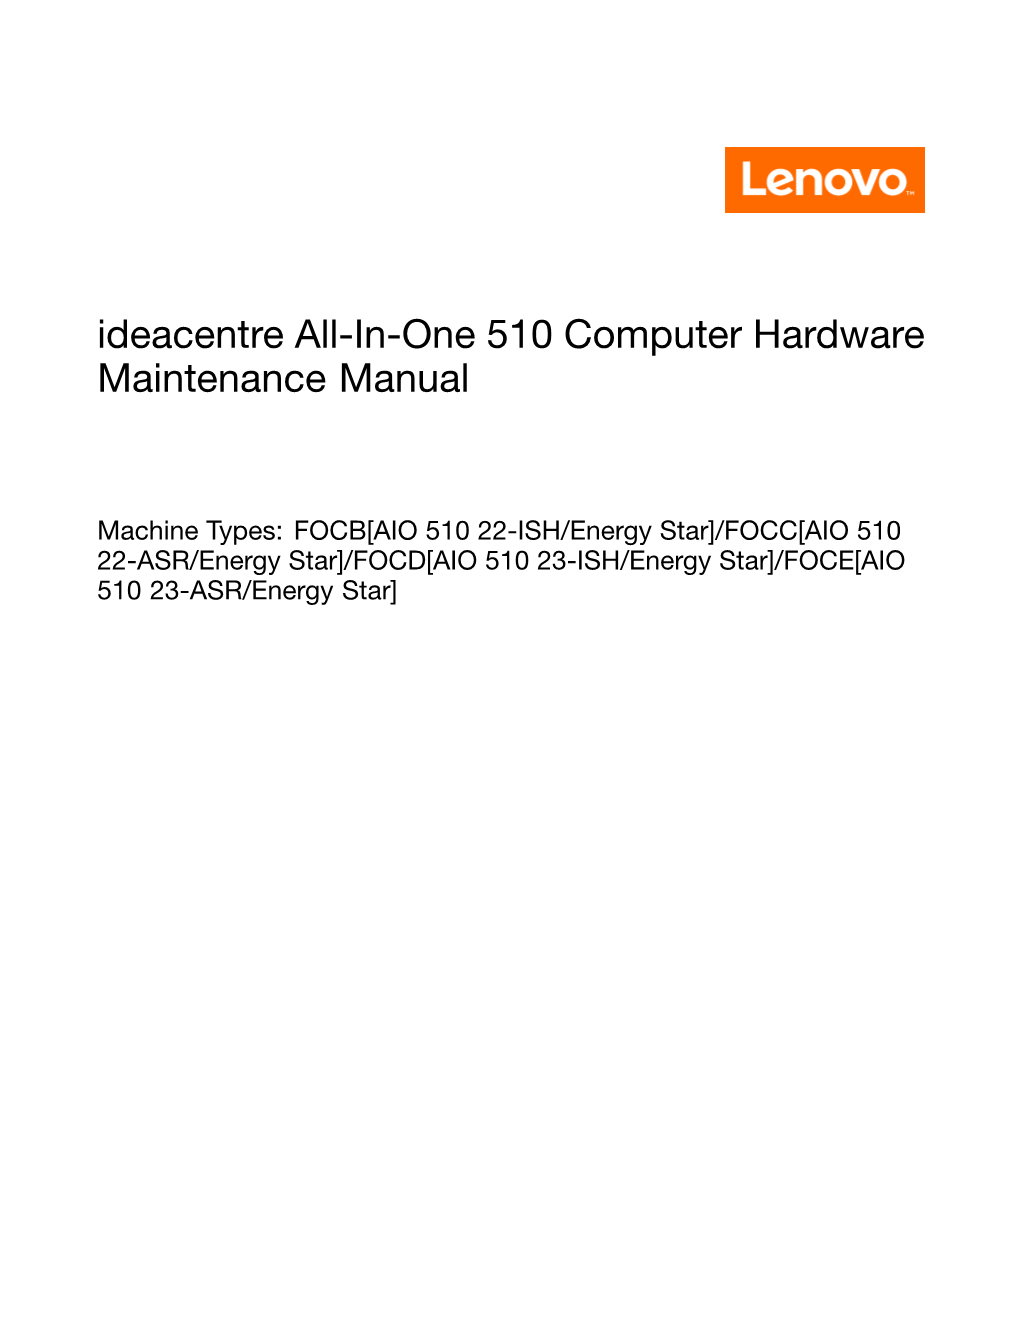 Ideacentre All-In-One 510 Computer Hardware Maintenance Manual